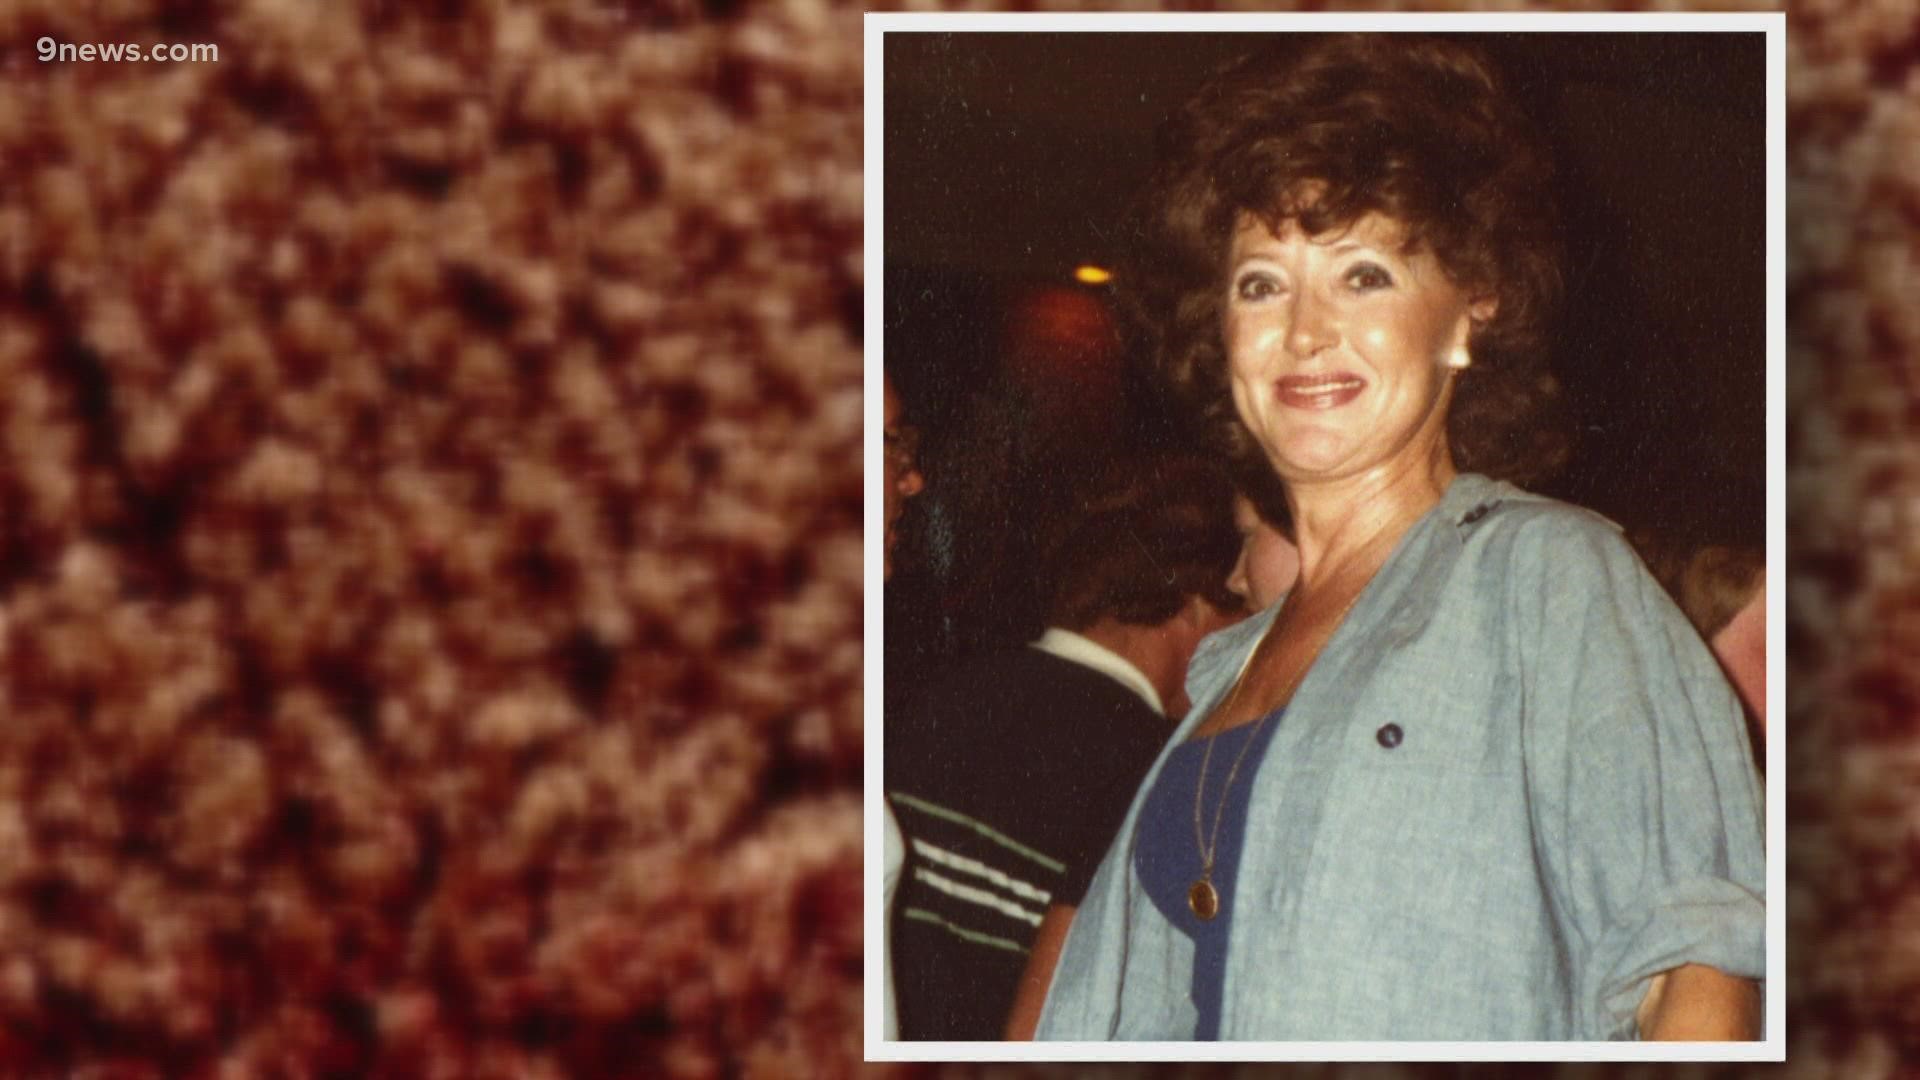 Alex Ewing faces multiple counts of first-degree murder in the killing of Patricia Louise Smith who was beaten to death with a hammer in 1984.